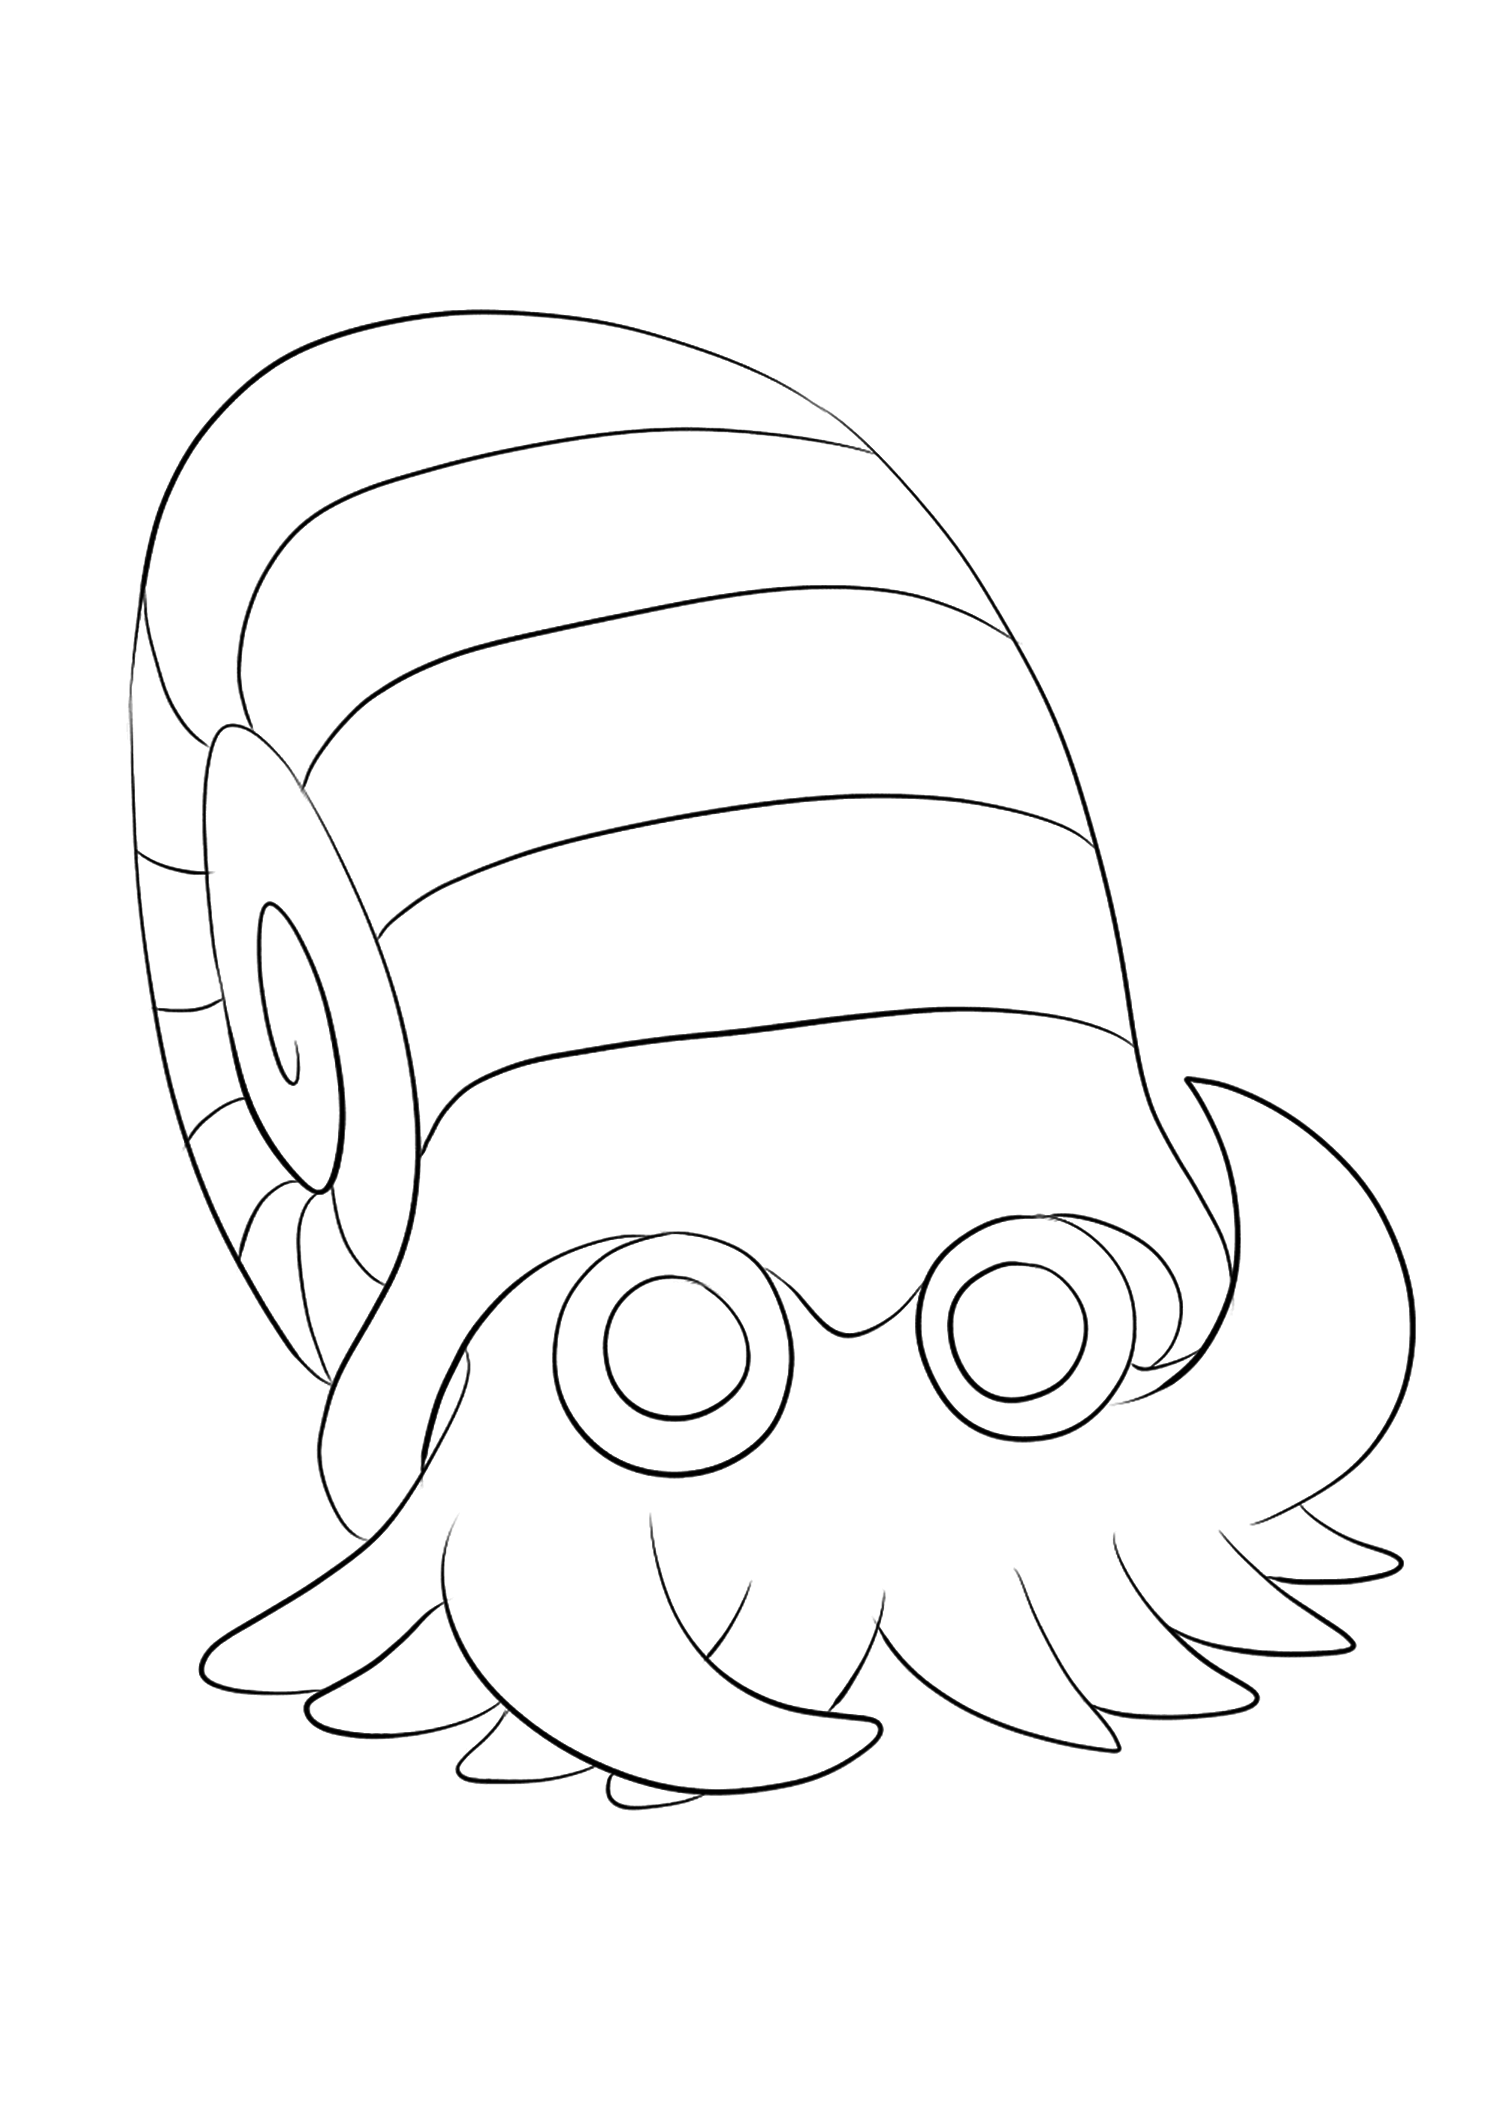 Omanyte (No.138). Omanyte Coloring page, Generation I Pokemon of type Rock and WaterOriginal image credit: Pokemon linearts by Lilly Gerbil on Deviantart.Permission:  All rights reserved © Pokemon company and Ken Sugimori.